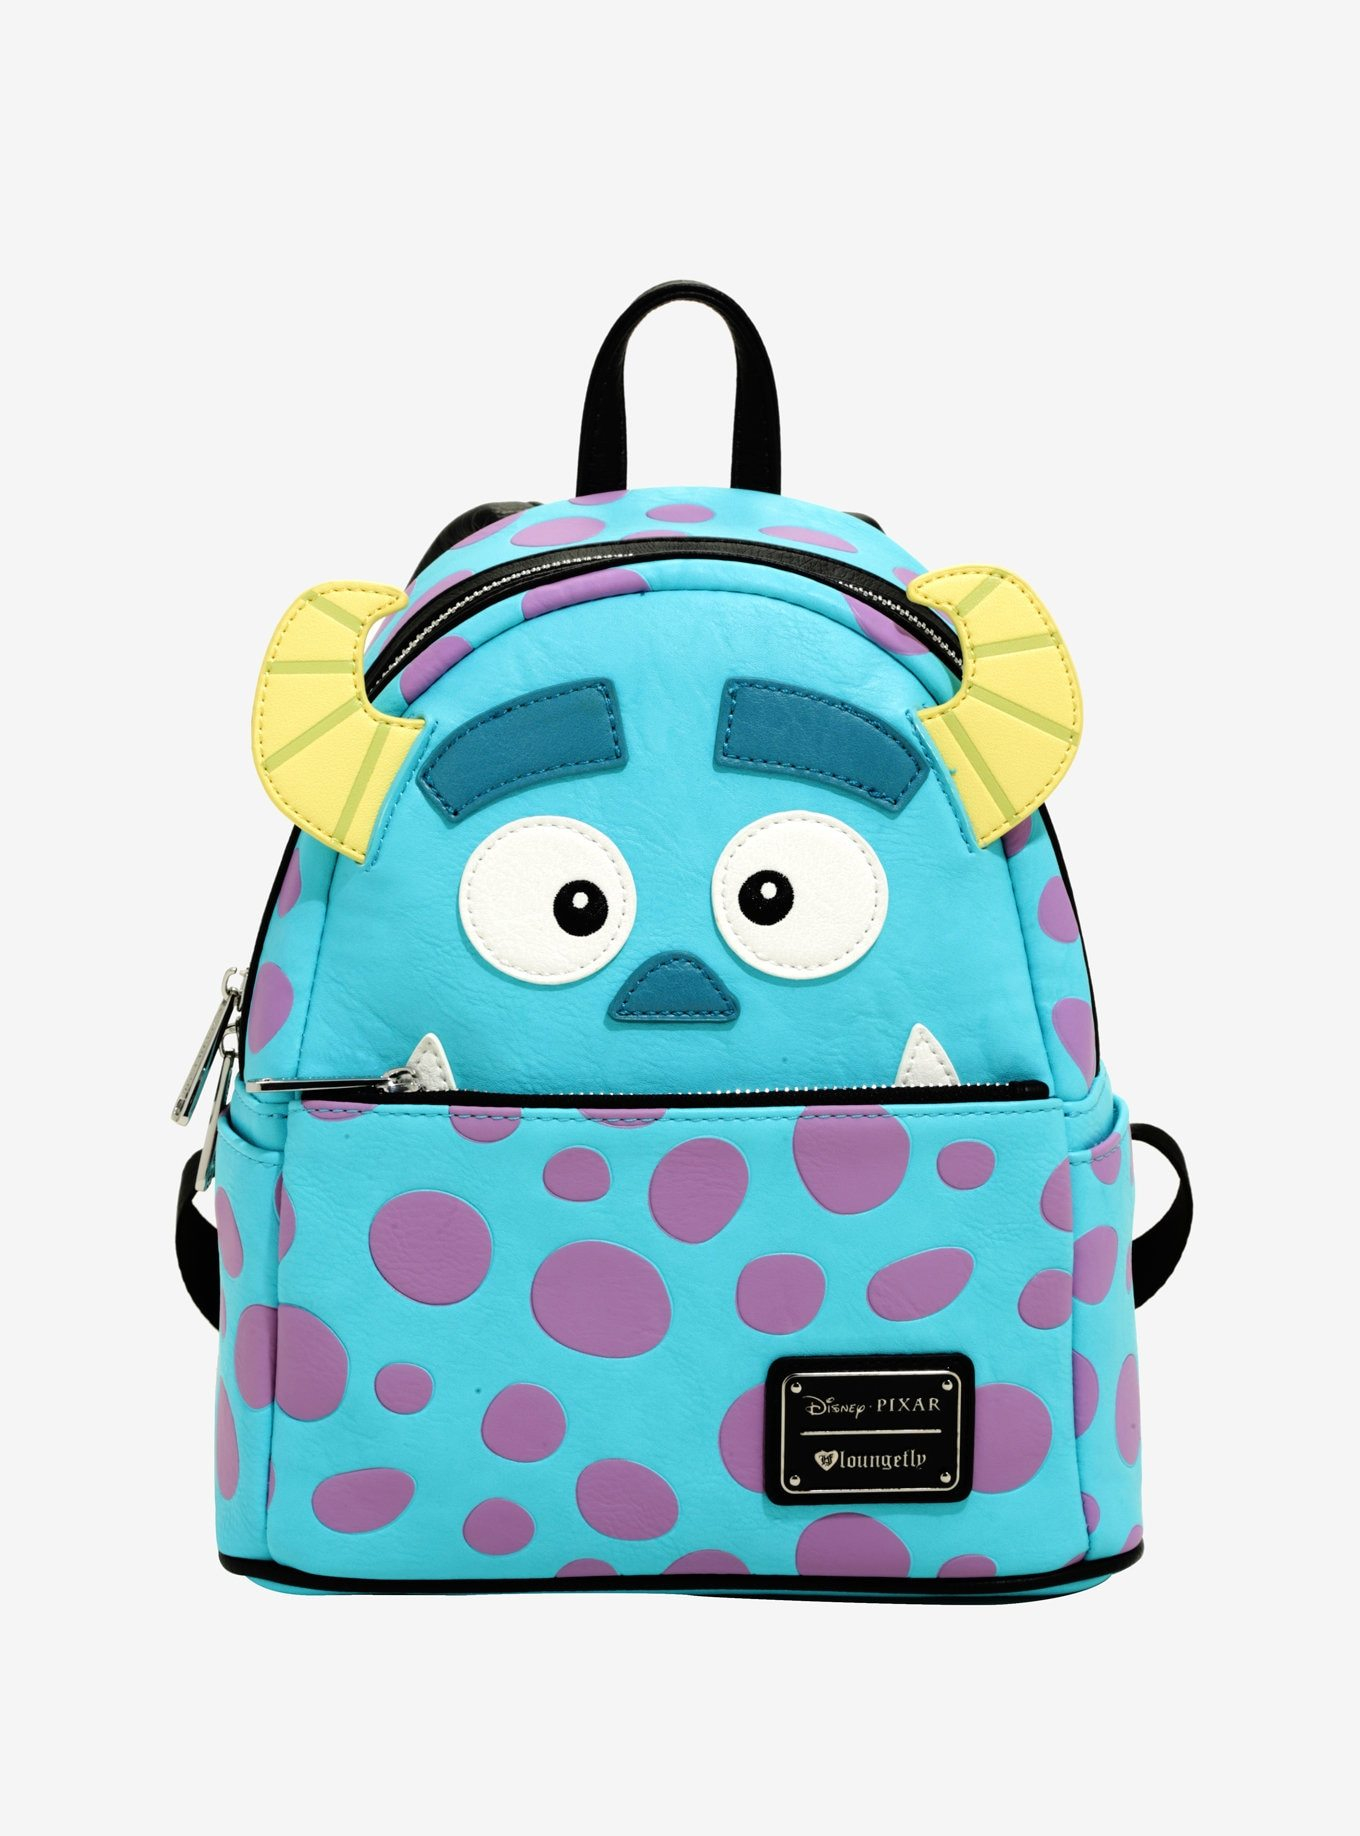 BoxLunch's Back to School Collection is Monstrously Appealing ...